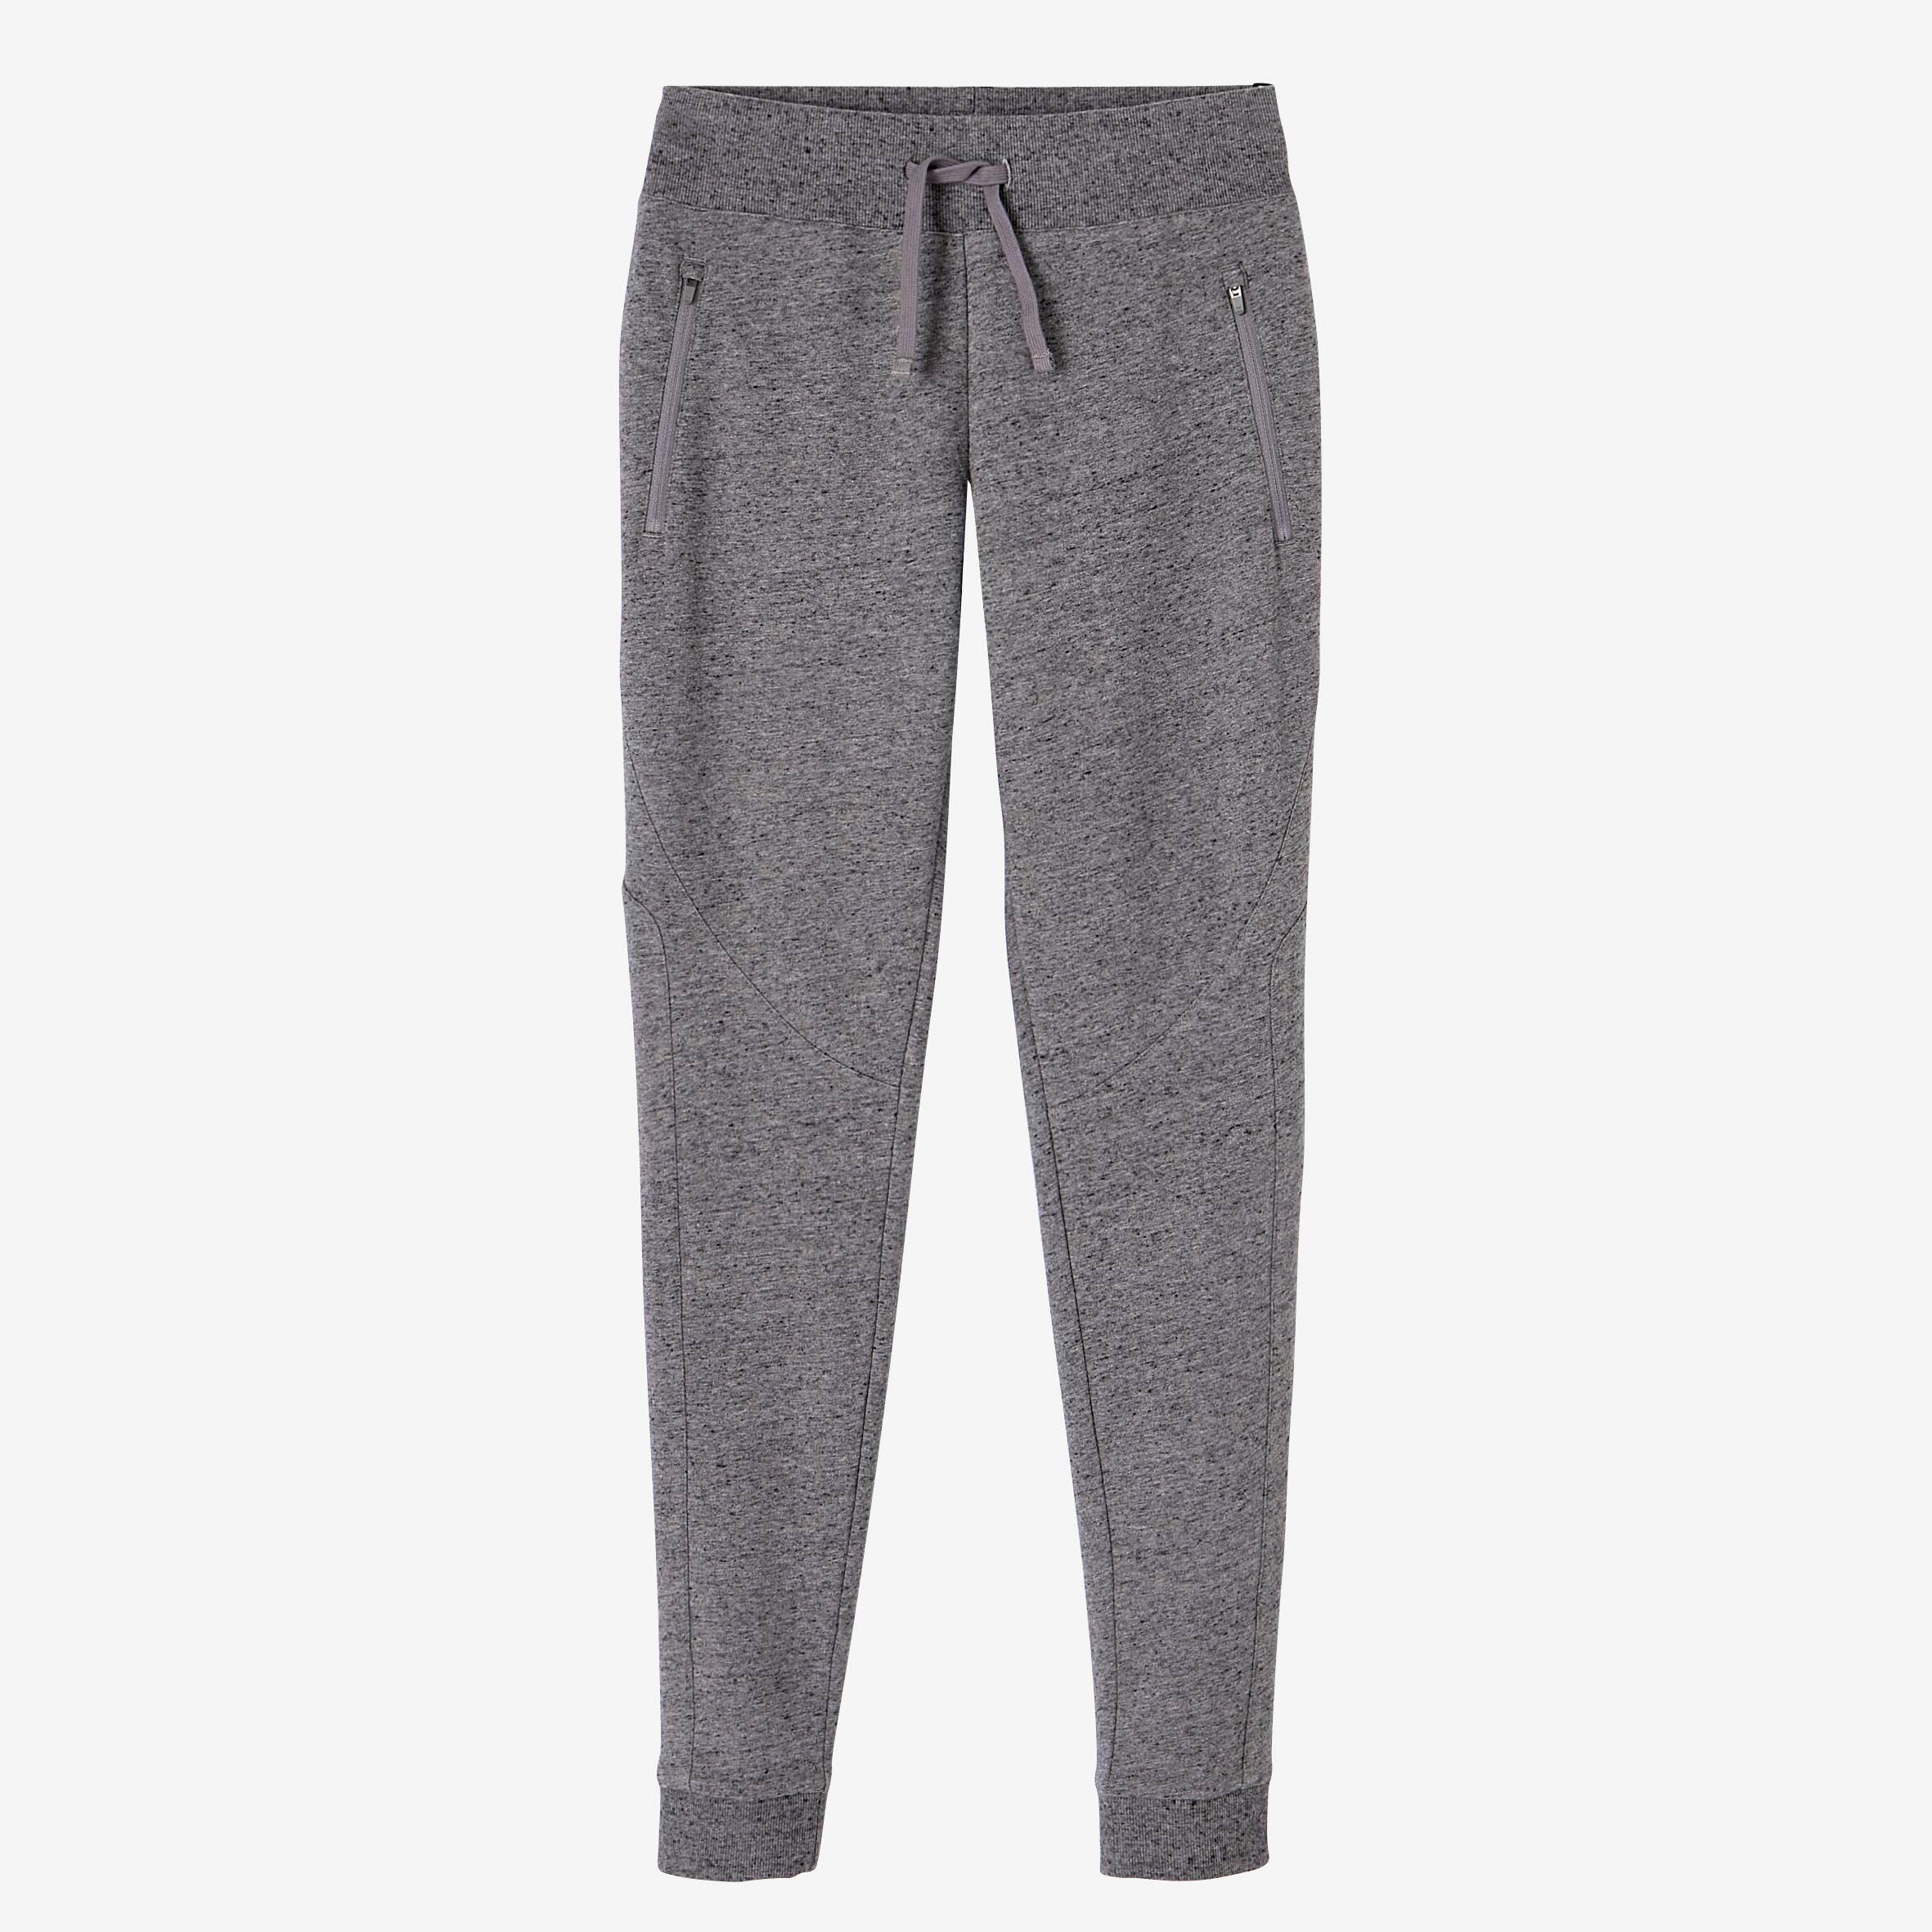 QUECHUA by Decathlon | Solid Women Grey Track Pants - Buy Grey QUECHUA by  Decathlon | Solid Women Grey Track Pants Online at Best Prices in India |  Flipkart.com